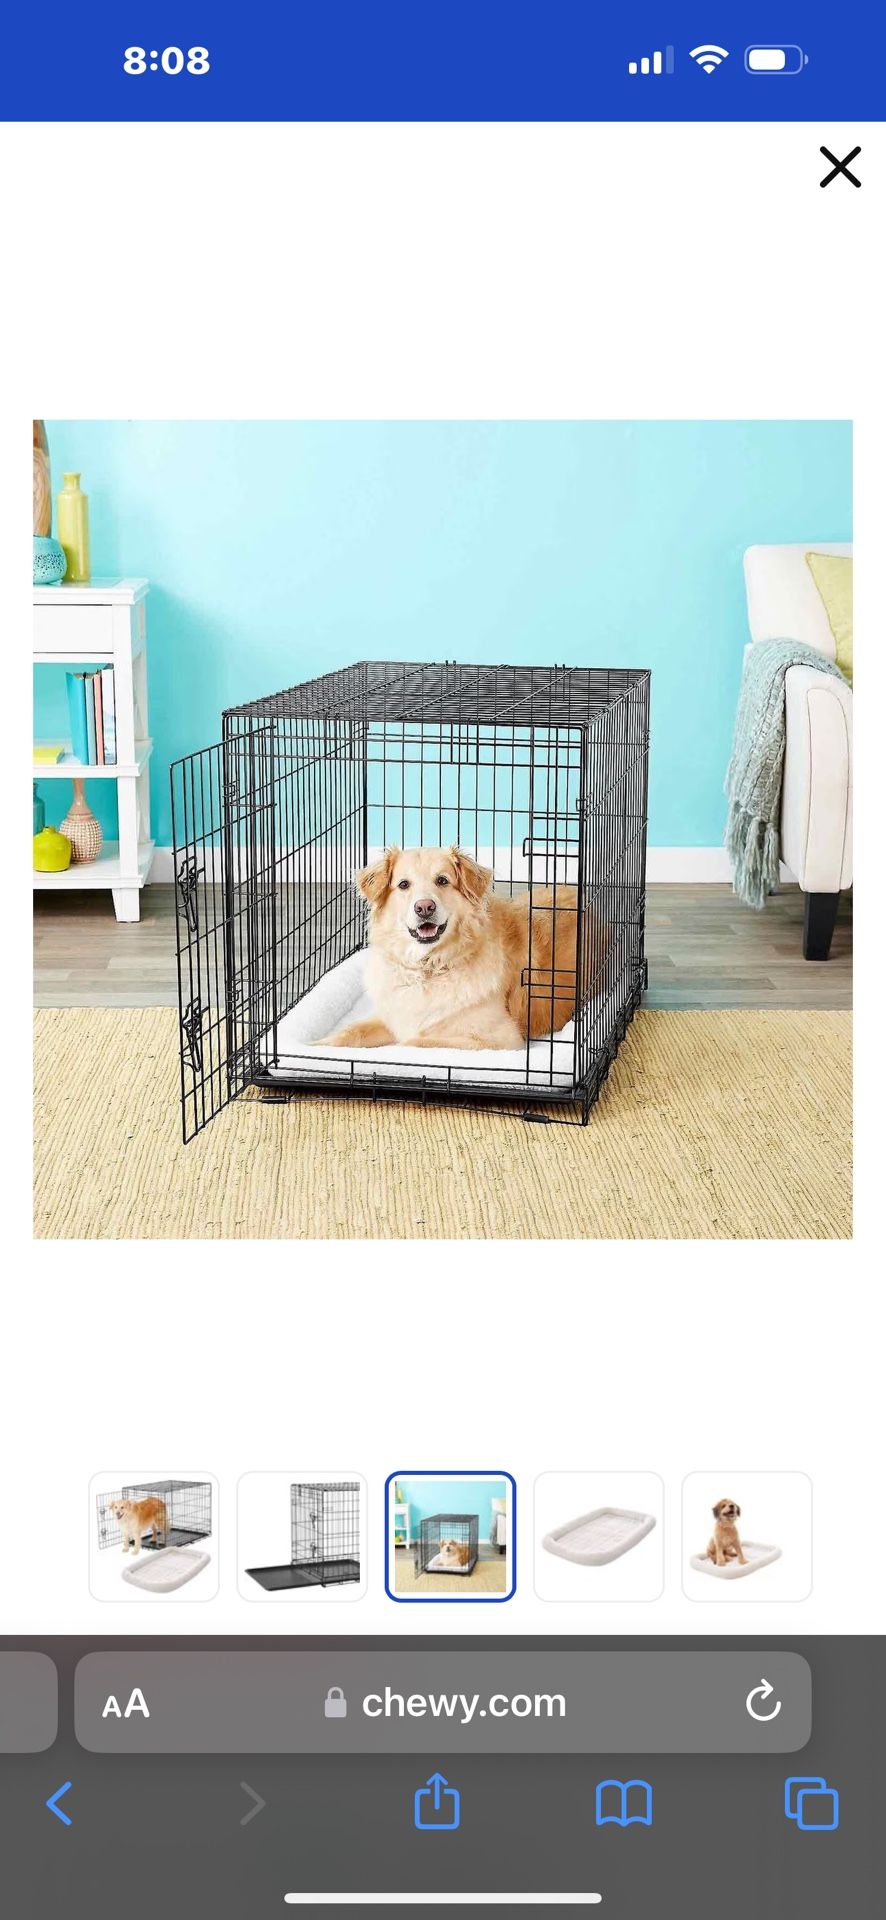 36in Dog Crate 